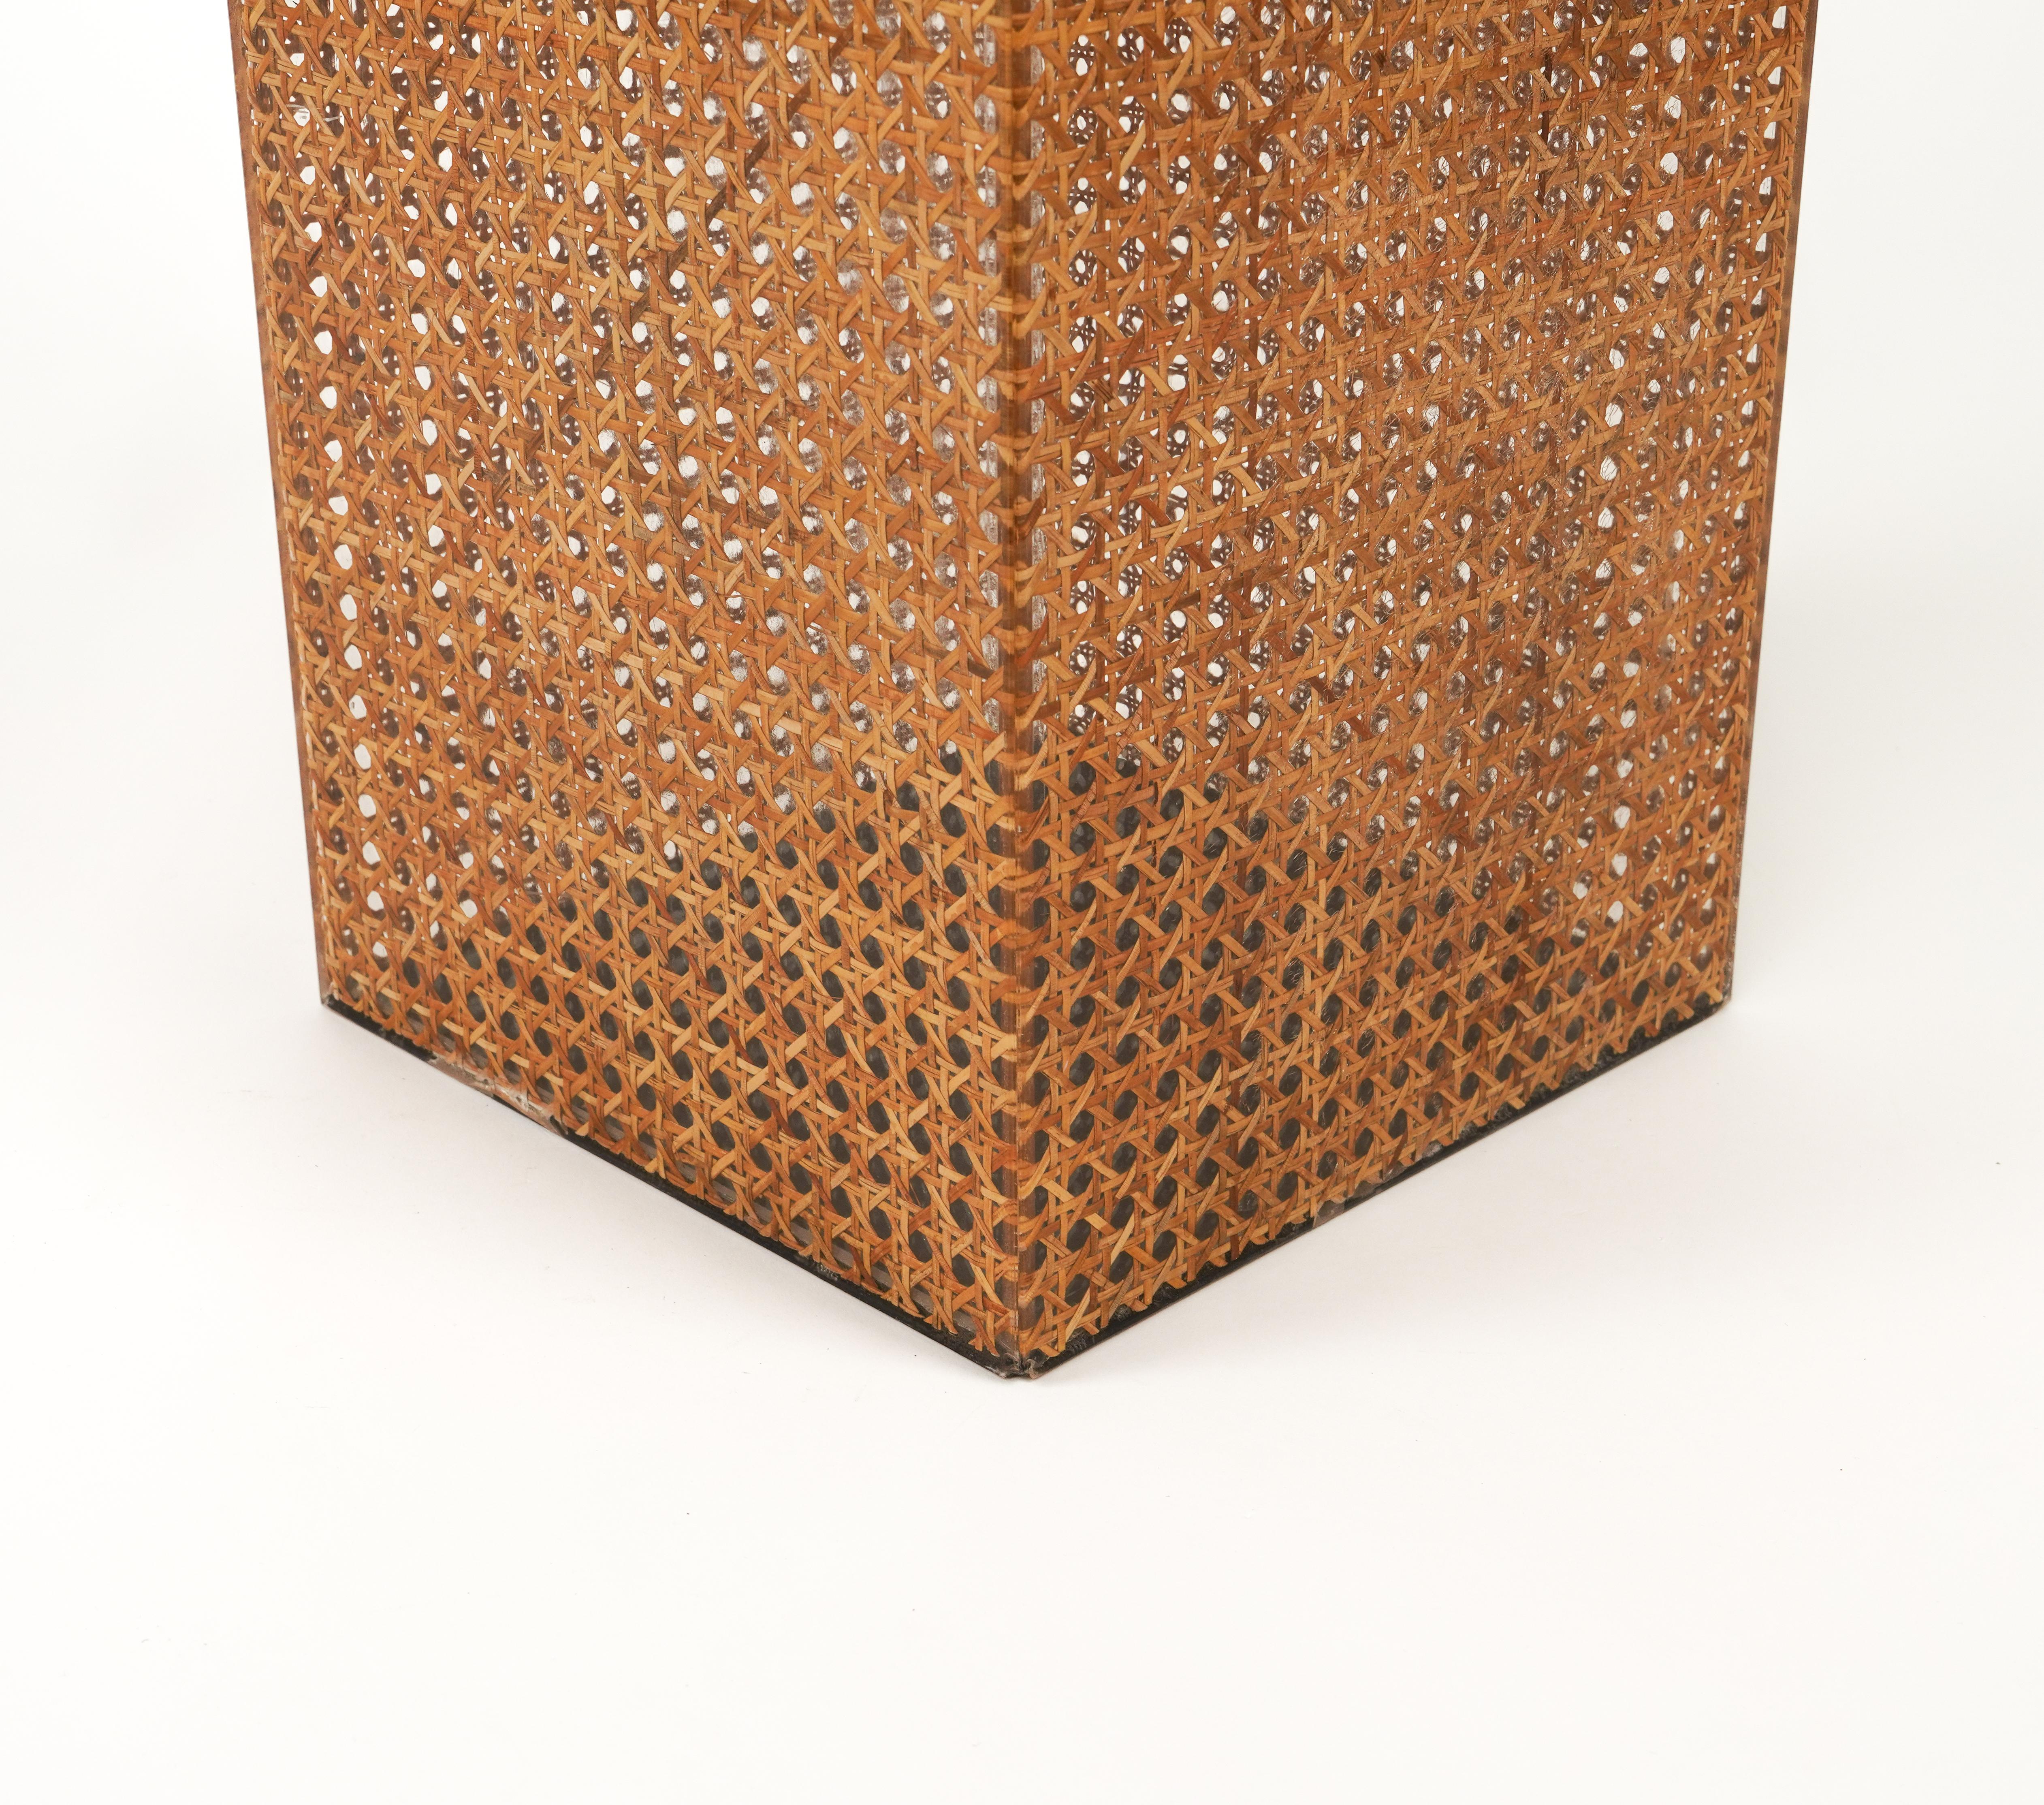 Umbrella Stand in Lucite, Rattan and Brass Christian Dior Style, Italy 1970s For Sale 7